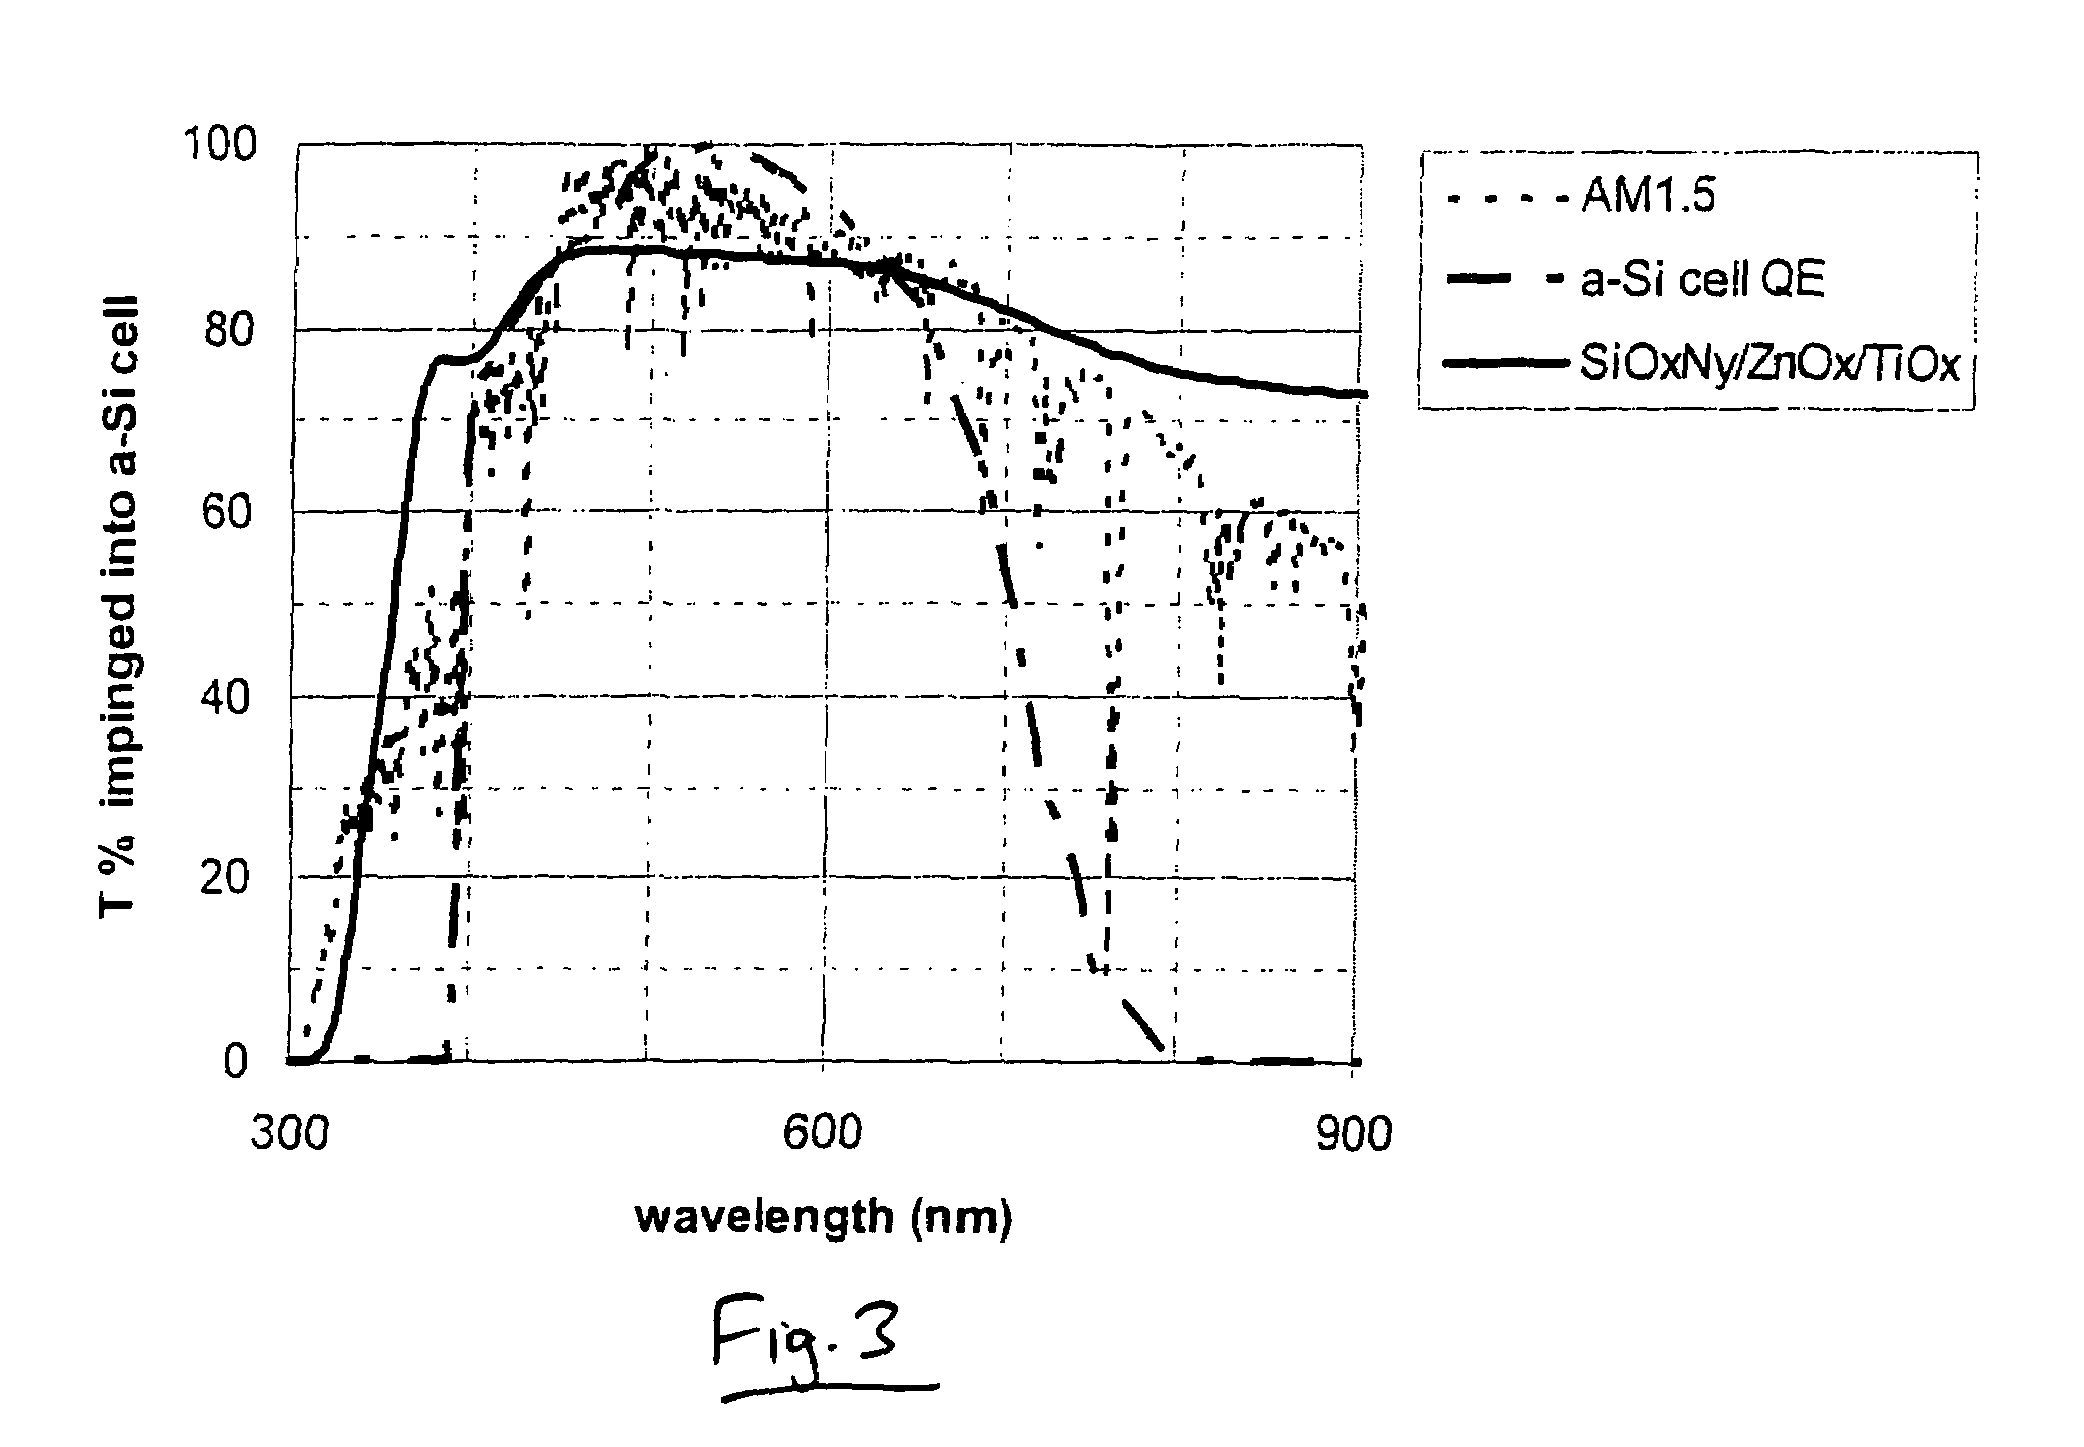 Front electrode including transparent conductive coating on patterned glass substrate for use in photovoltaic device and method of making same